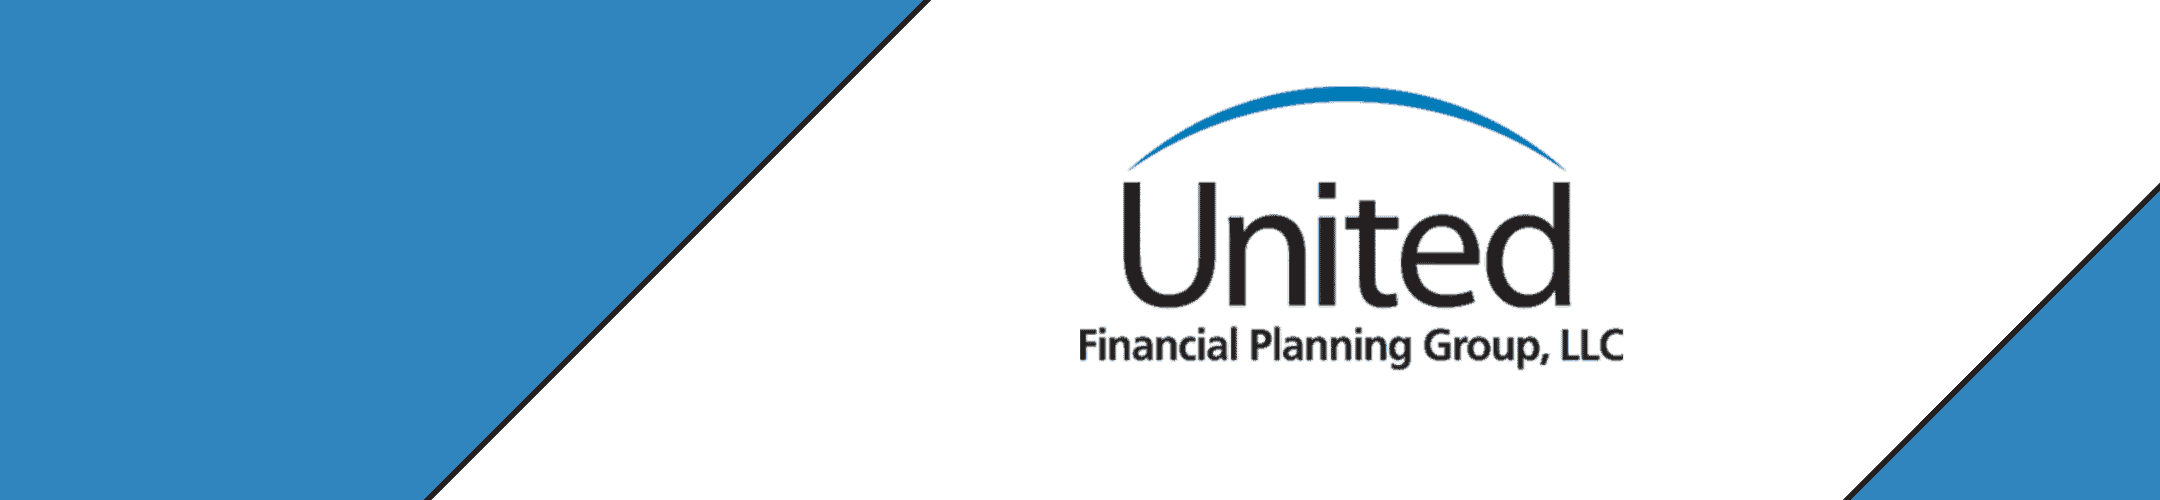 Logo of united financial planning group, llc on a blue and white background.